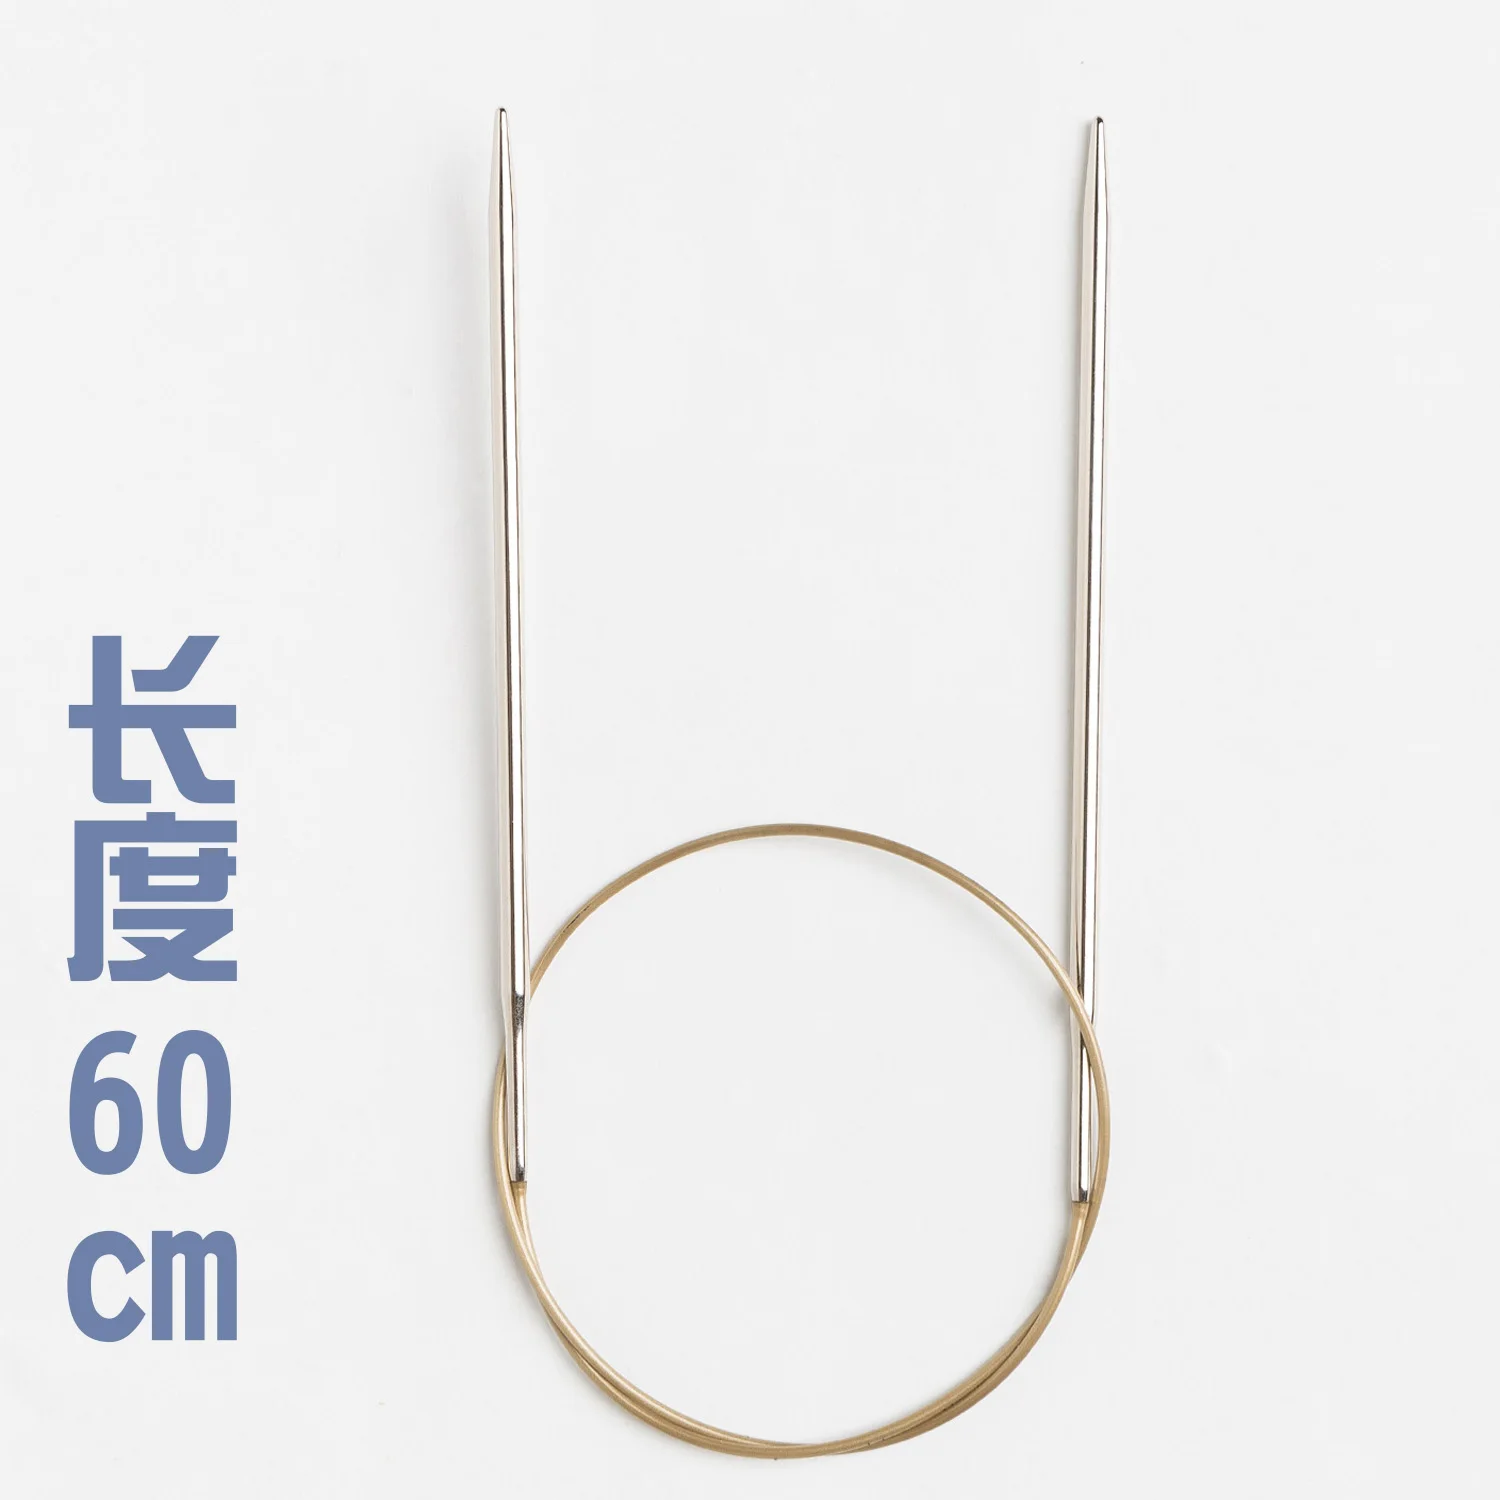 

Addi 105-7 60cm Fixed Circular Lace Knitting Needles with Extra Sharp Gold Tips 1.5mm 1.75mm 2.0mm 2.25mm 3.0mm 4MM 5MM 7MM 8MM